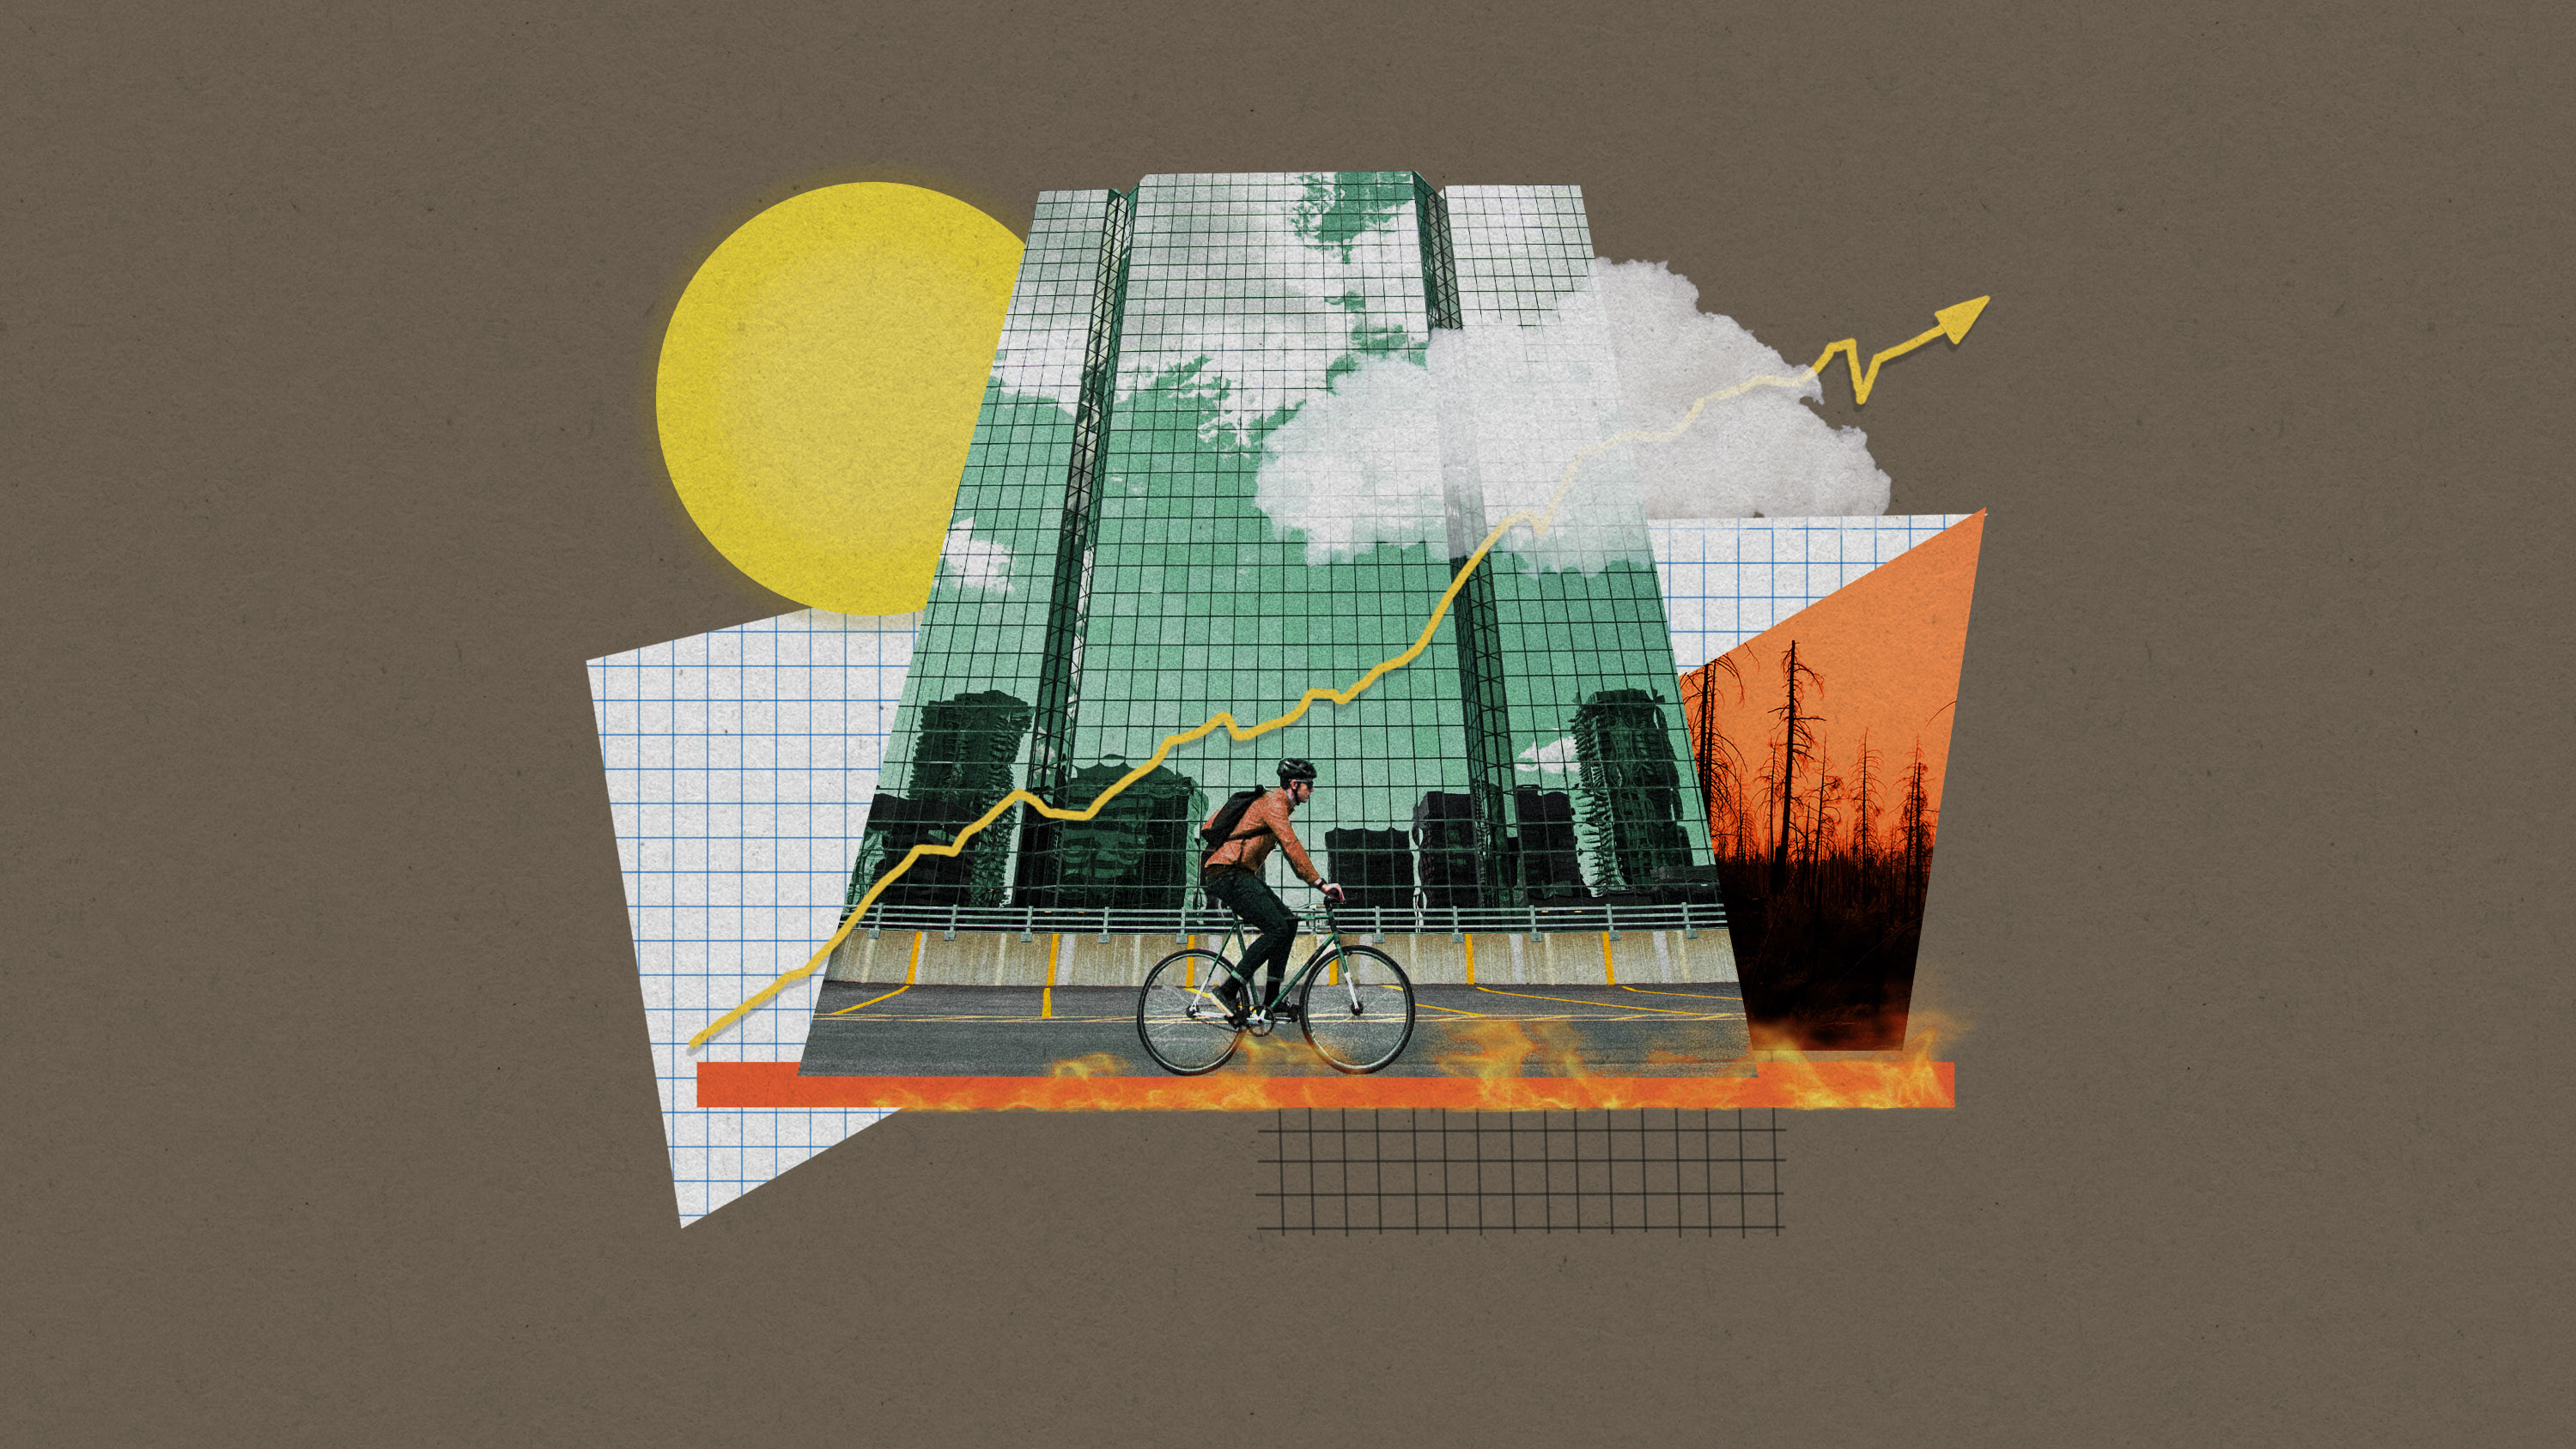 climate change data over the grid of a glass building with a cloudy sky reflected in it. A bicyclist rides in that direction with fire under their wheels.